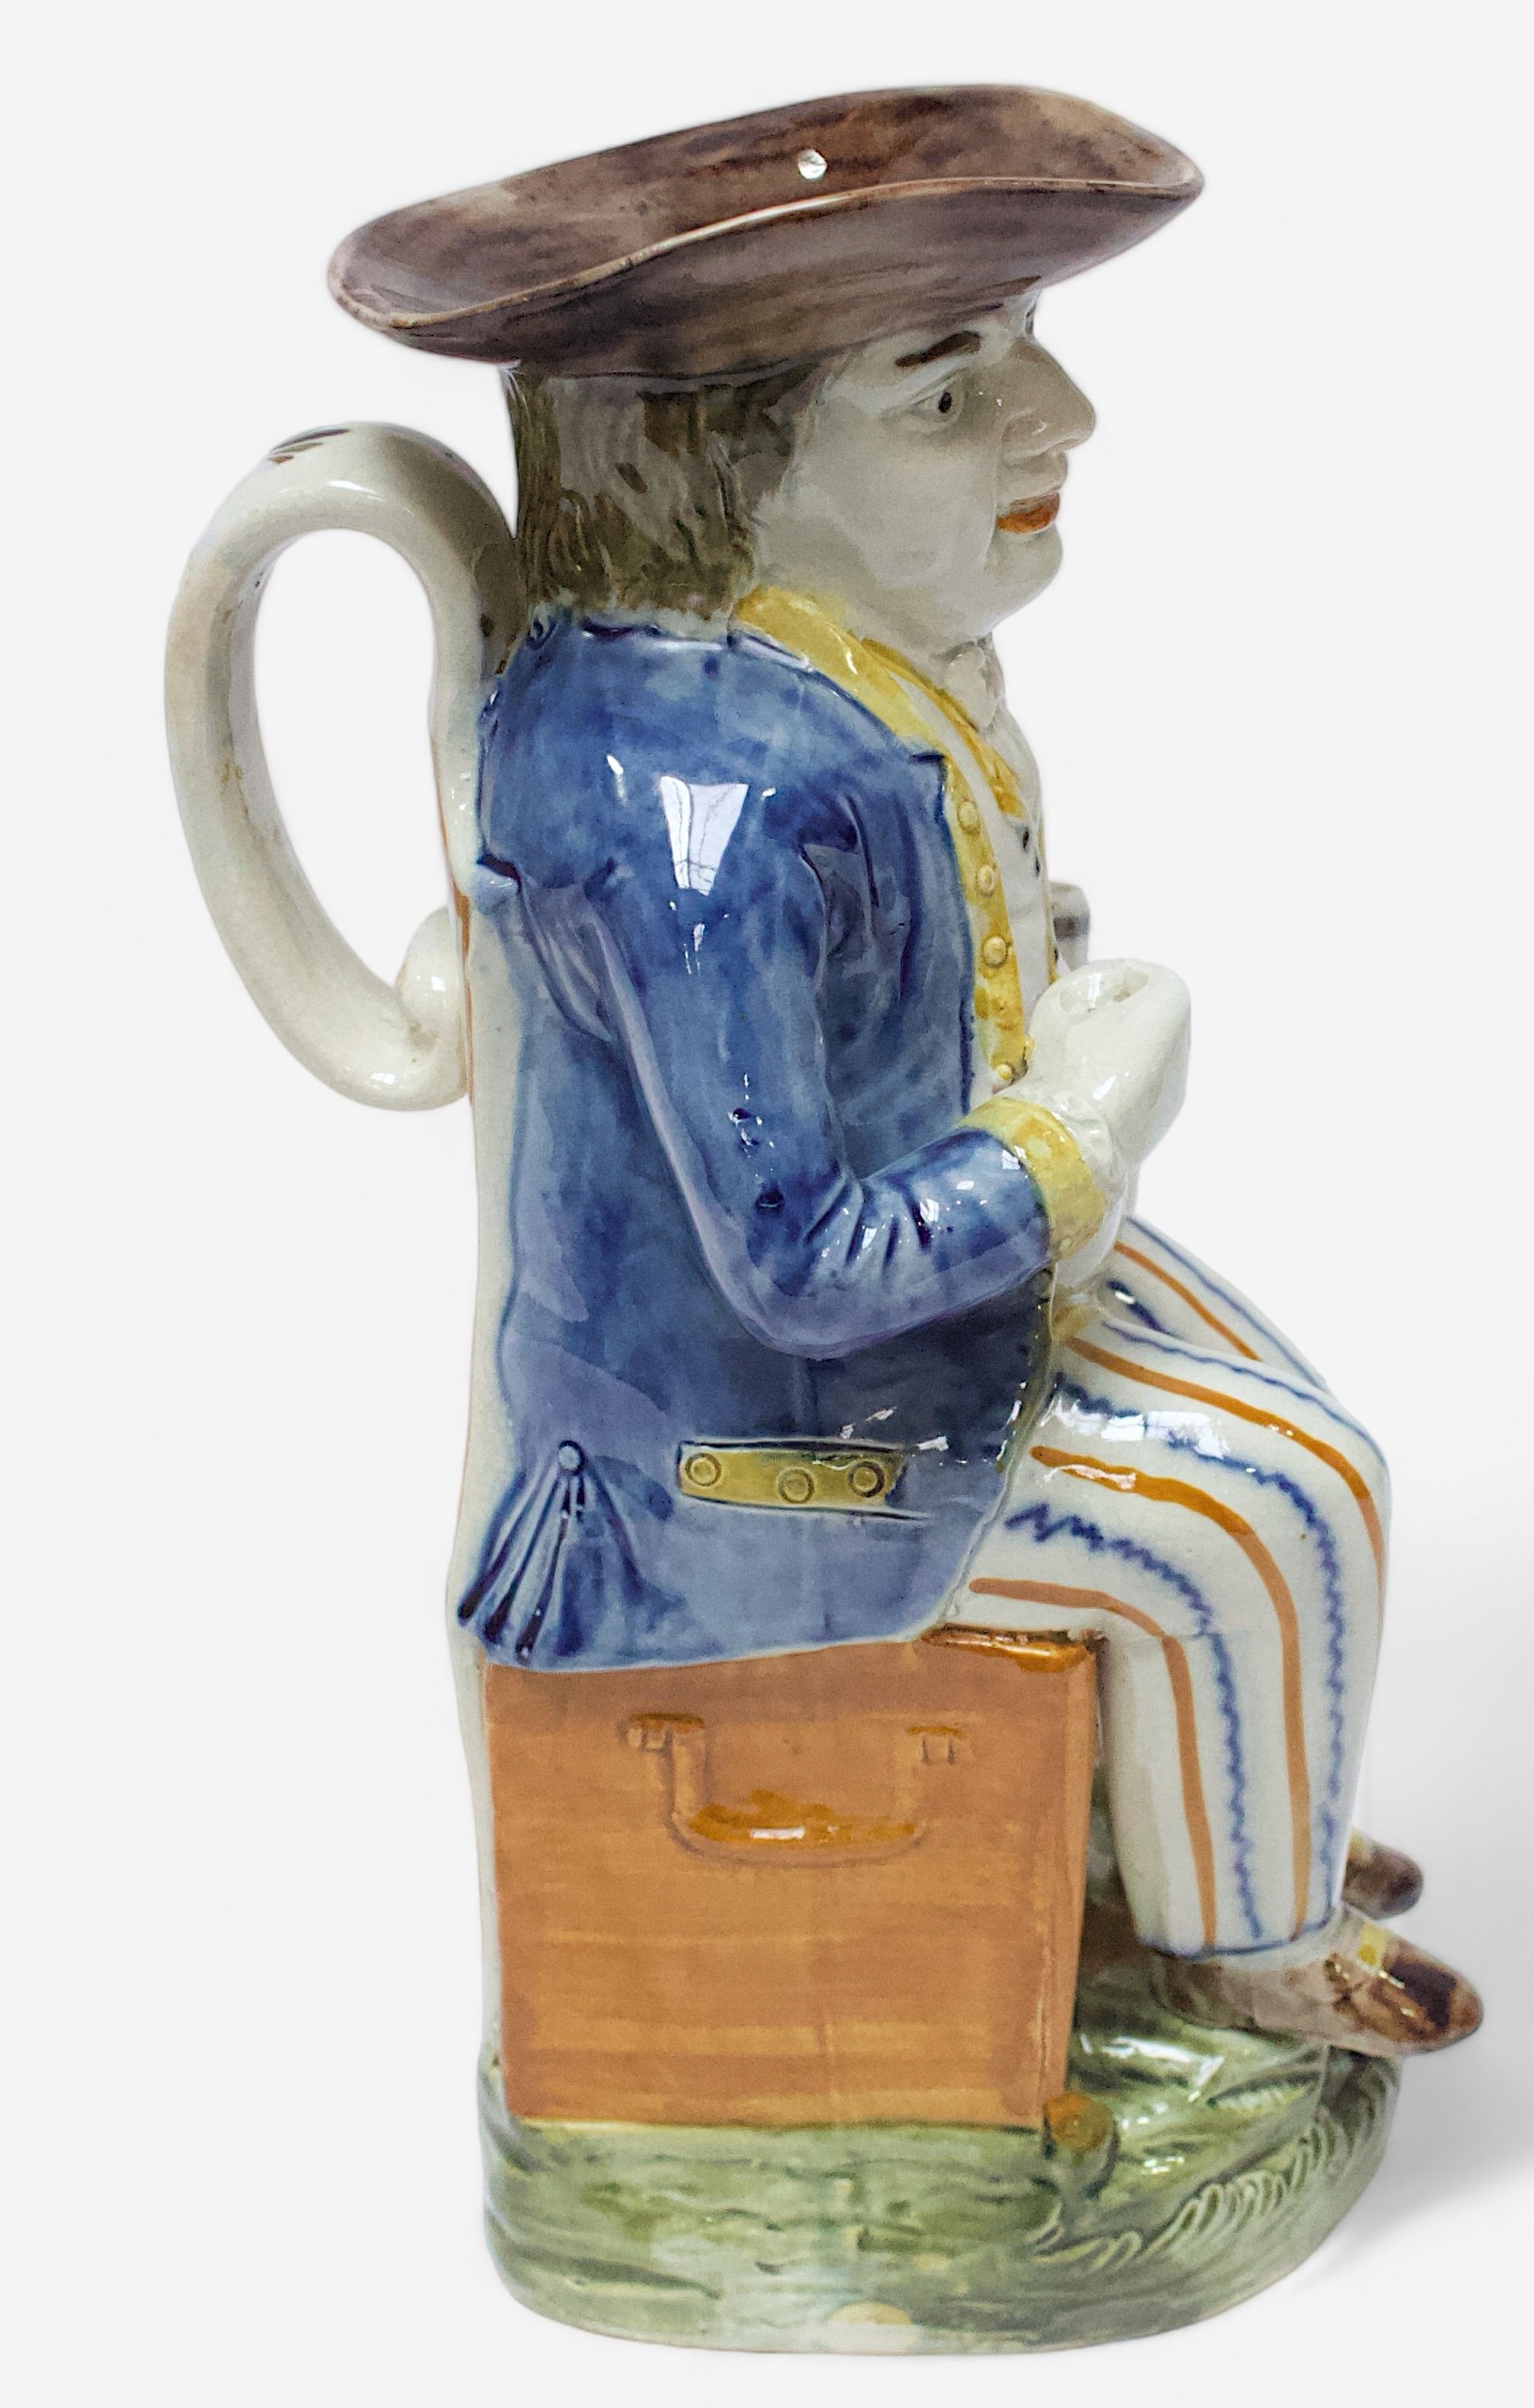 A Prattware Pottery ‘Sailor’ toby jug, c1790-1810, seated holding a jug, striped britches, blue coat - Image 2 of 4